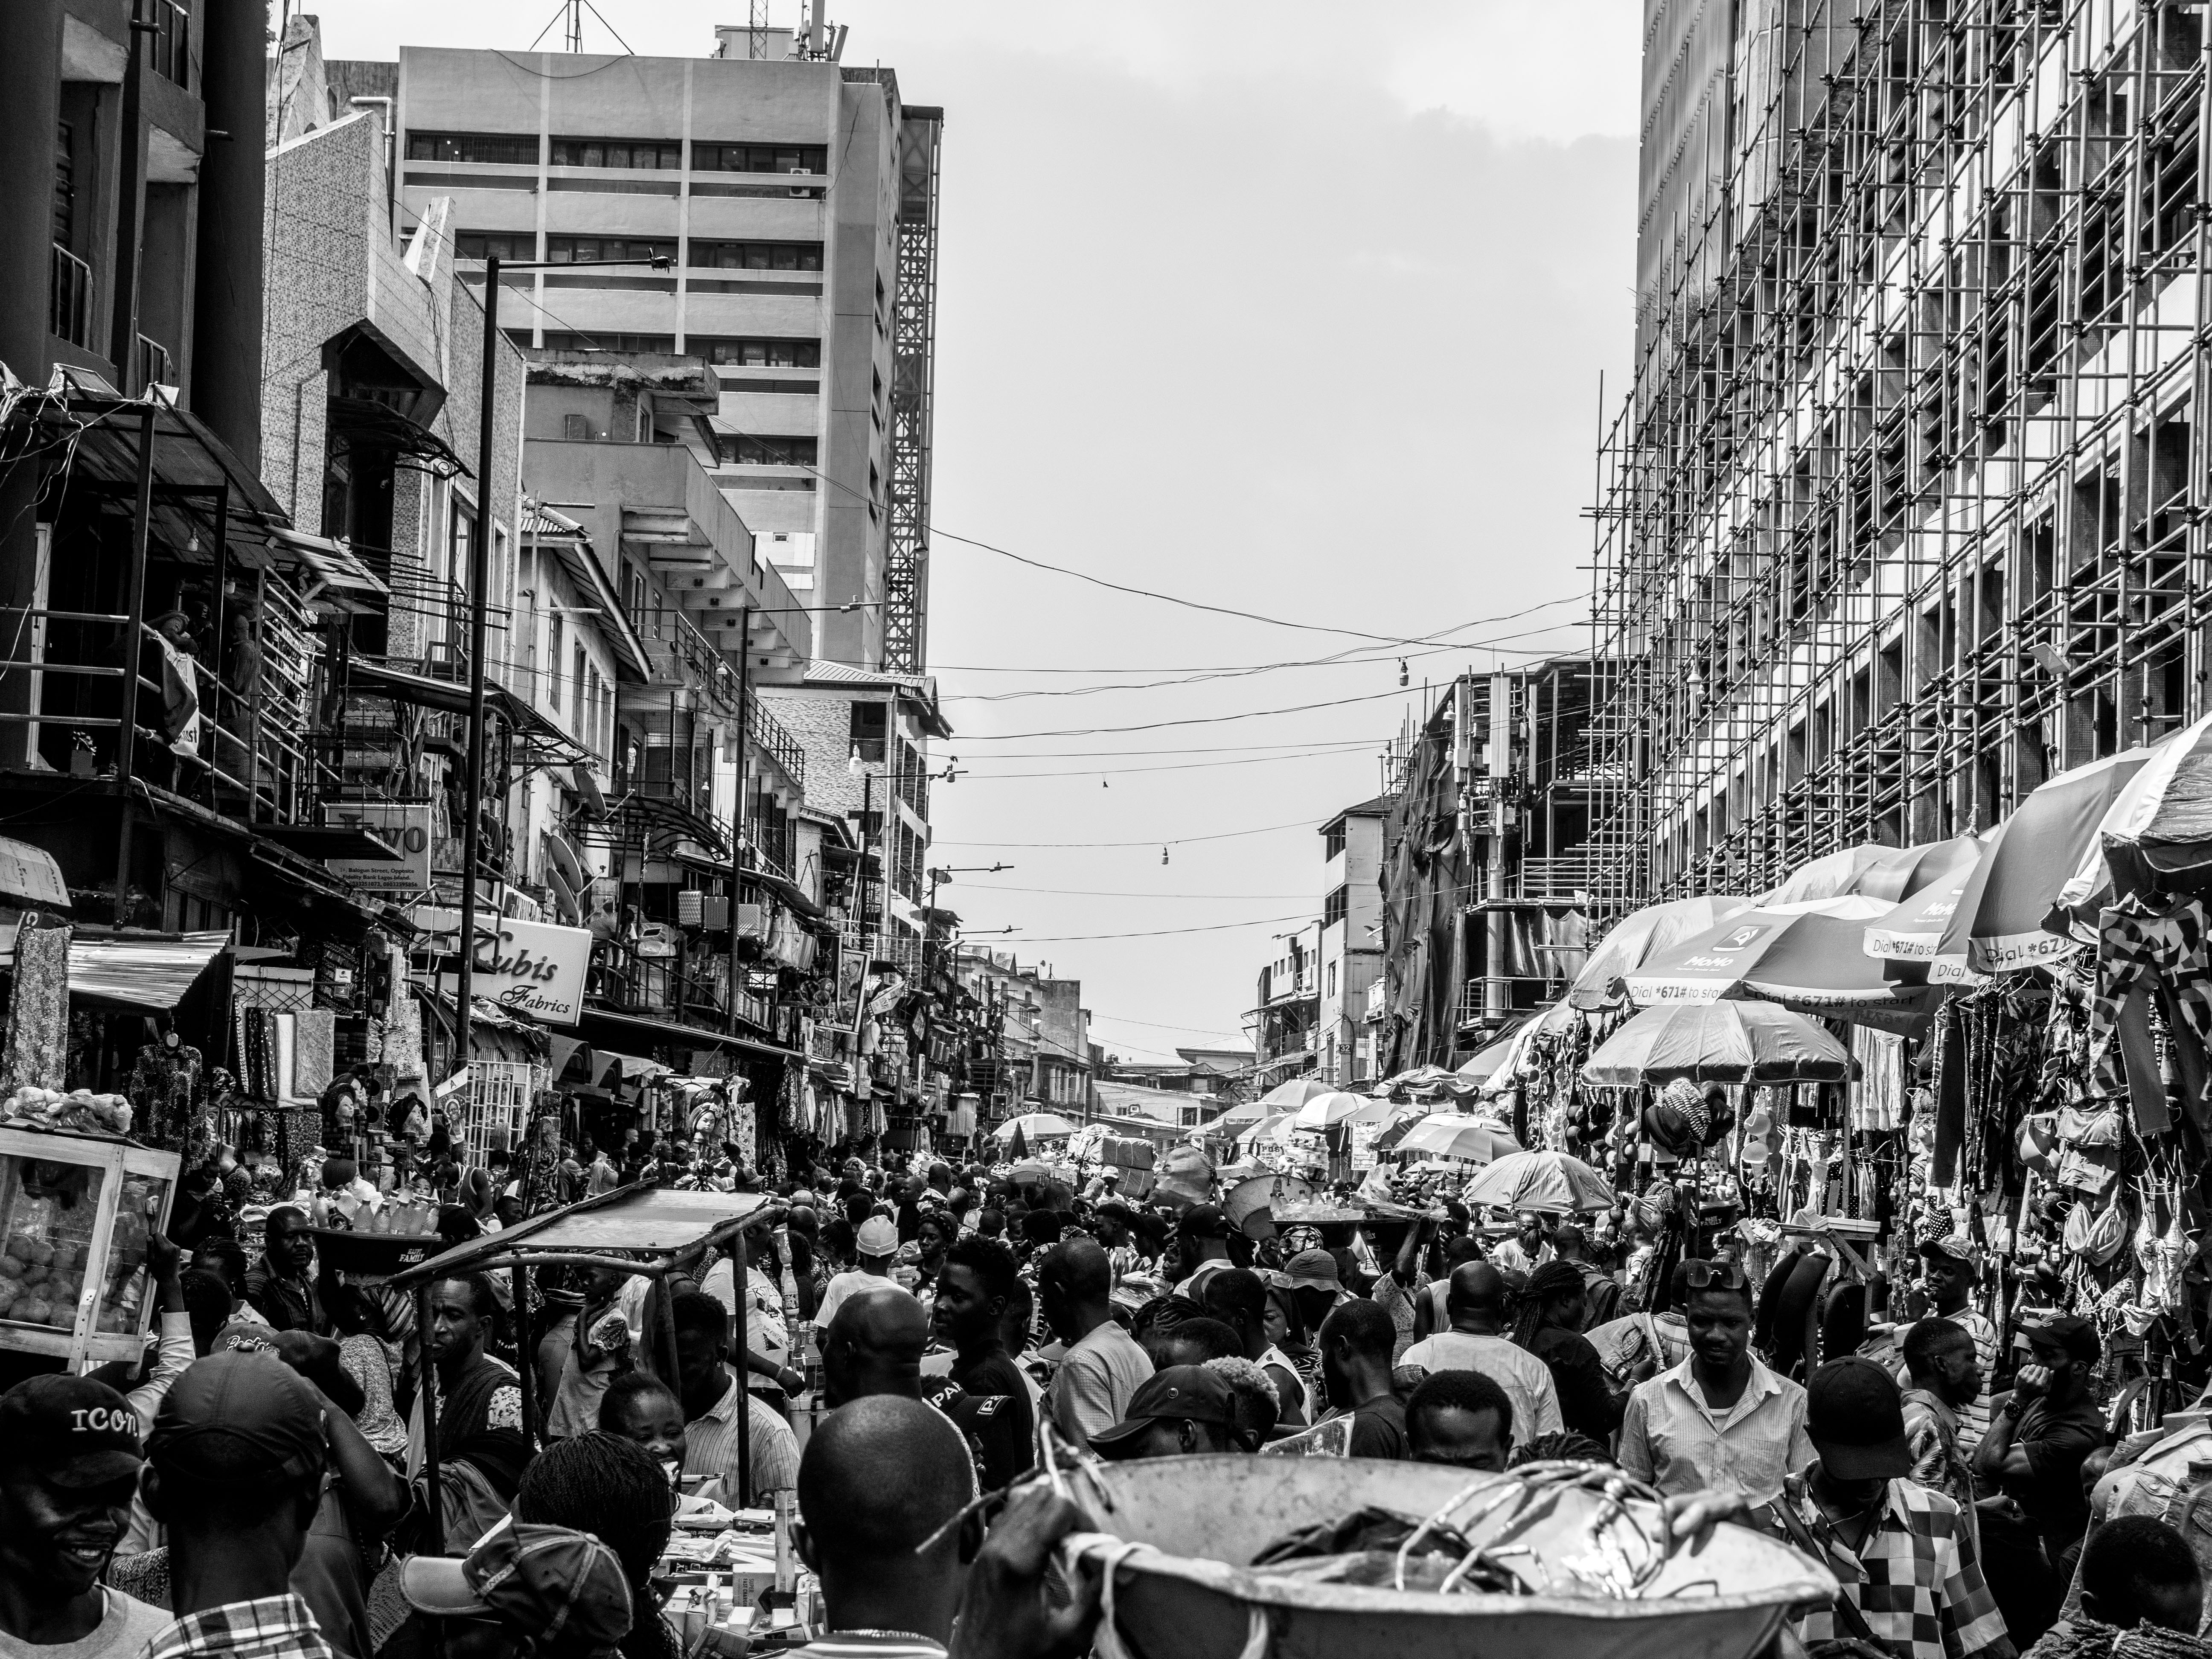 Beyond Colour: The Silent Language of a City by Efe Edosio